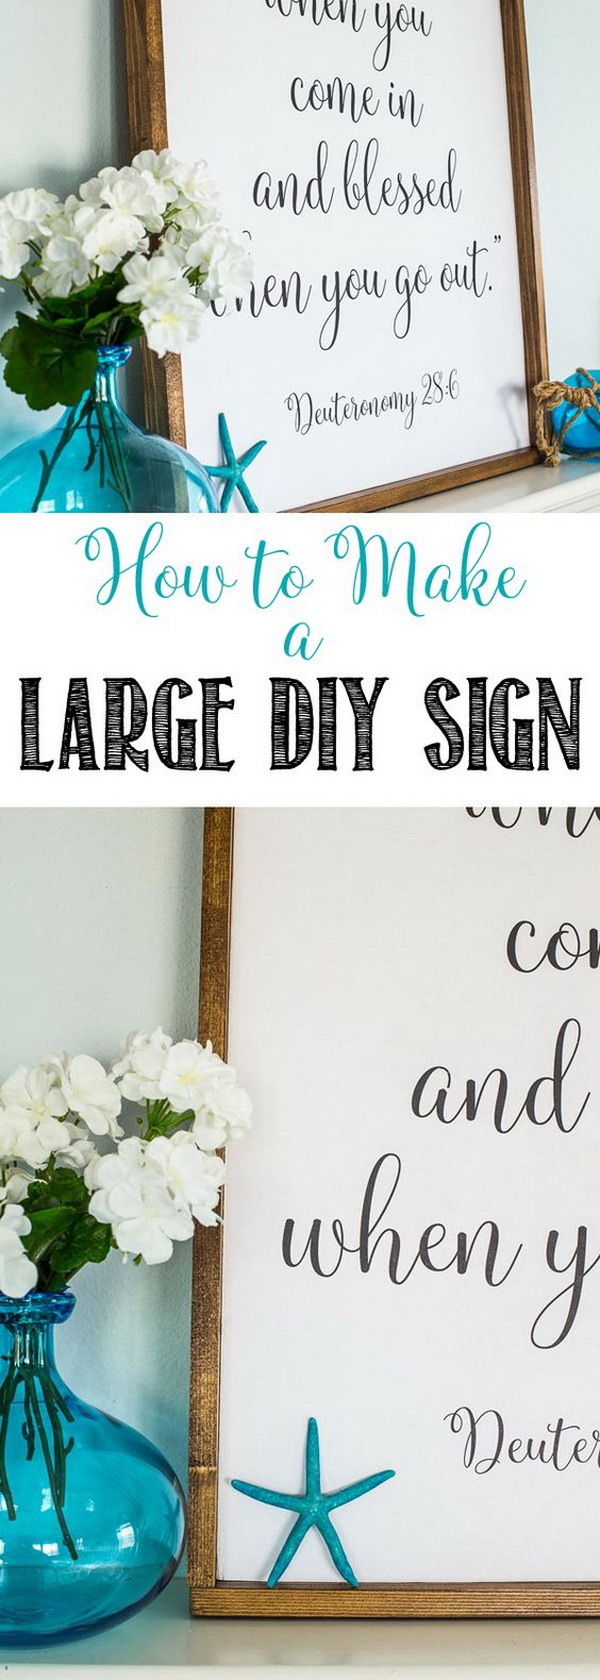 Large DIY Mantel Sign. It is time to put away your drab winter decor and give your home a fresh new makeover for summer with this nautical DIY framed sign! Perfect for your mantel decor this spring or summer season! 